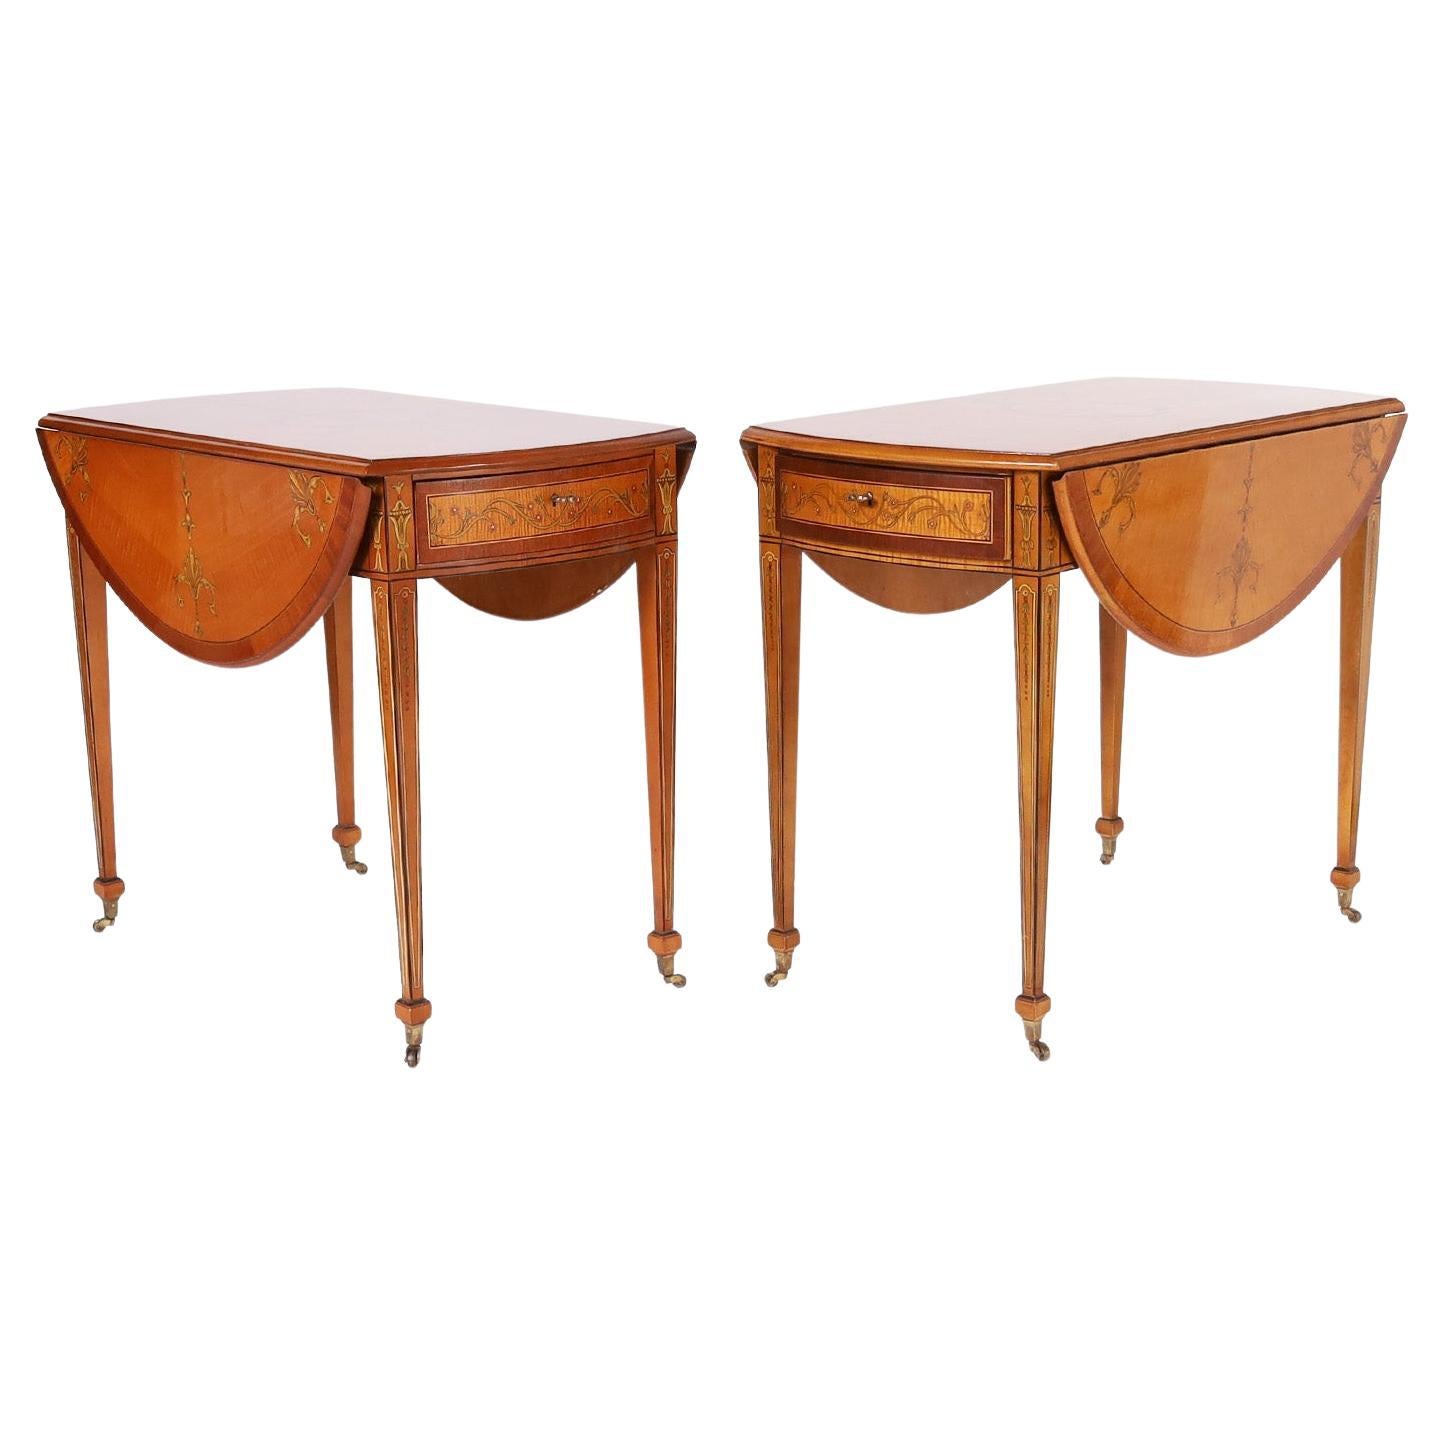 Pair of Vintage Adam Style Drop Leaf Tables or Stands For Sale